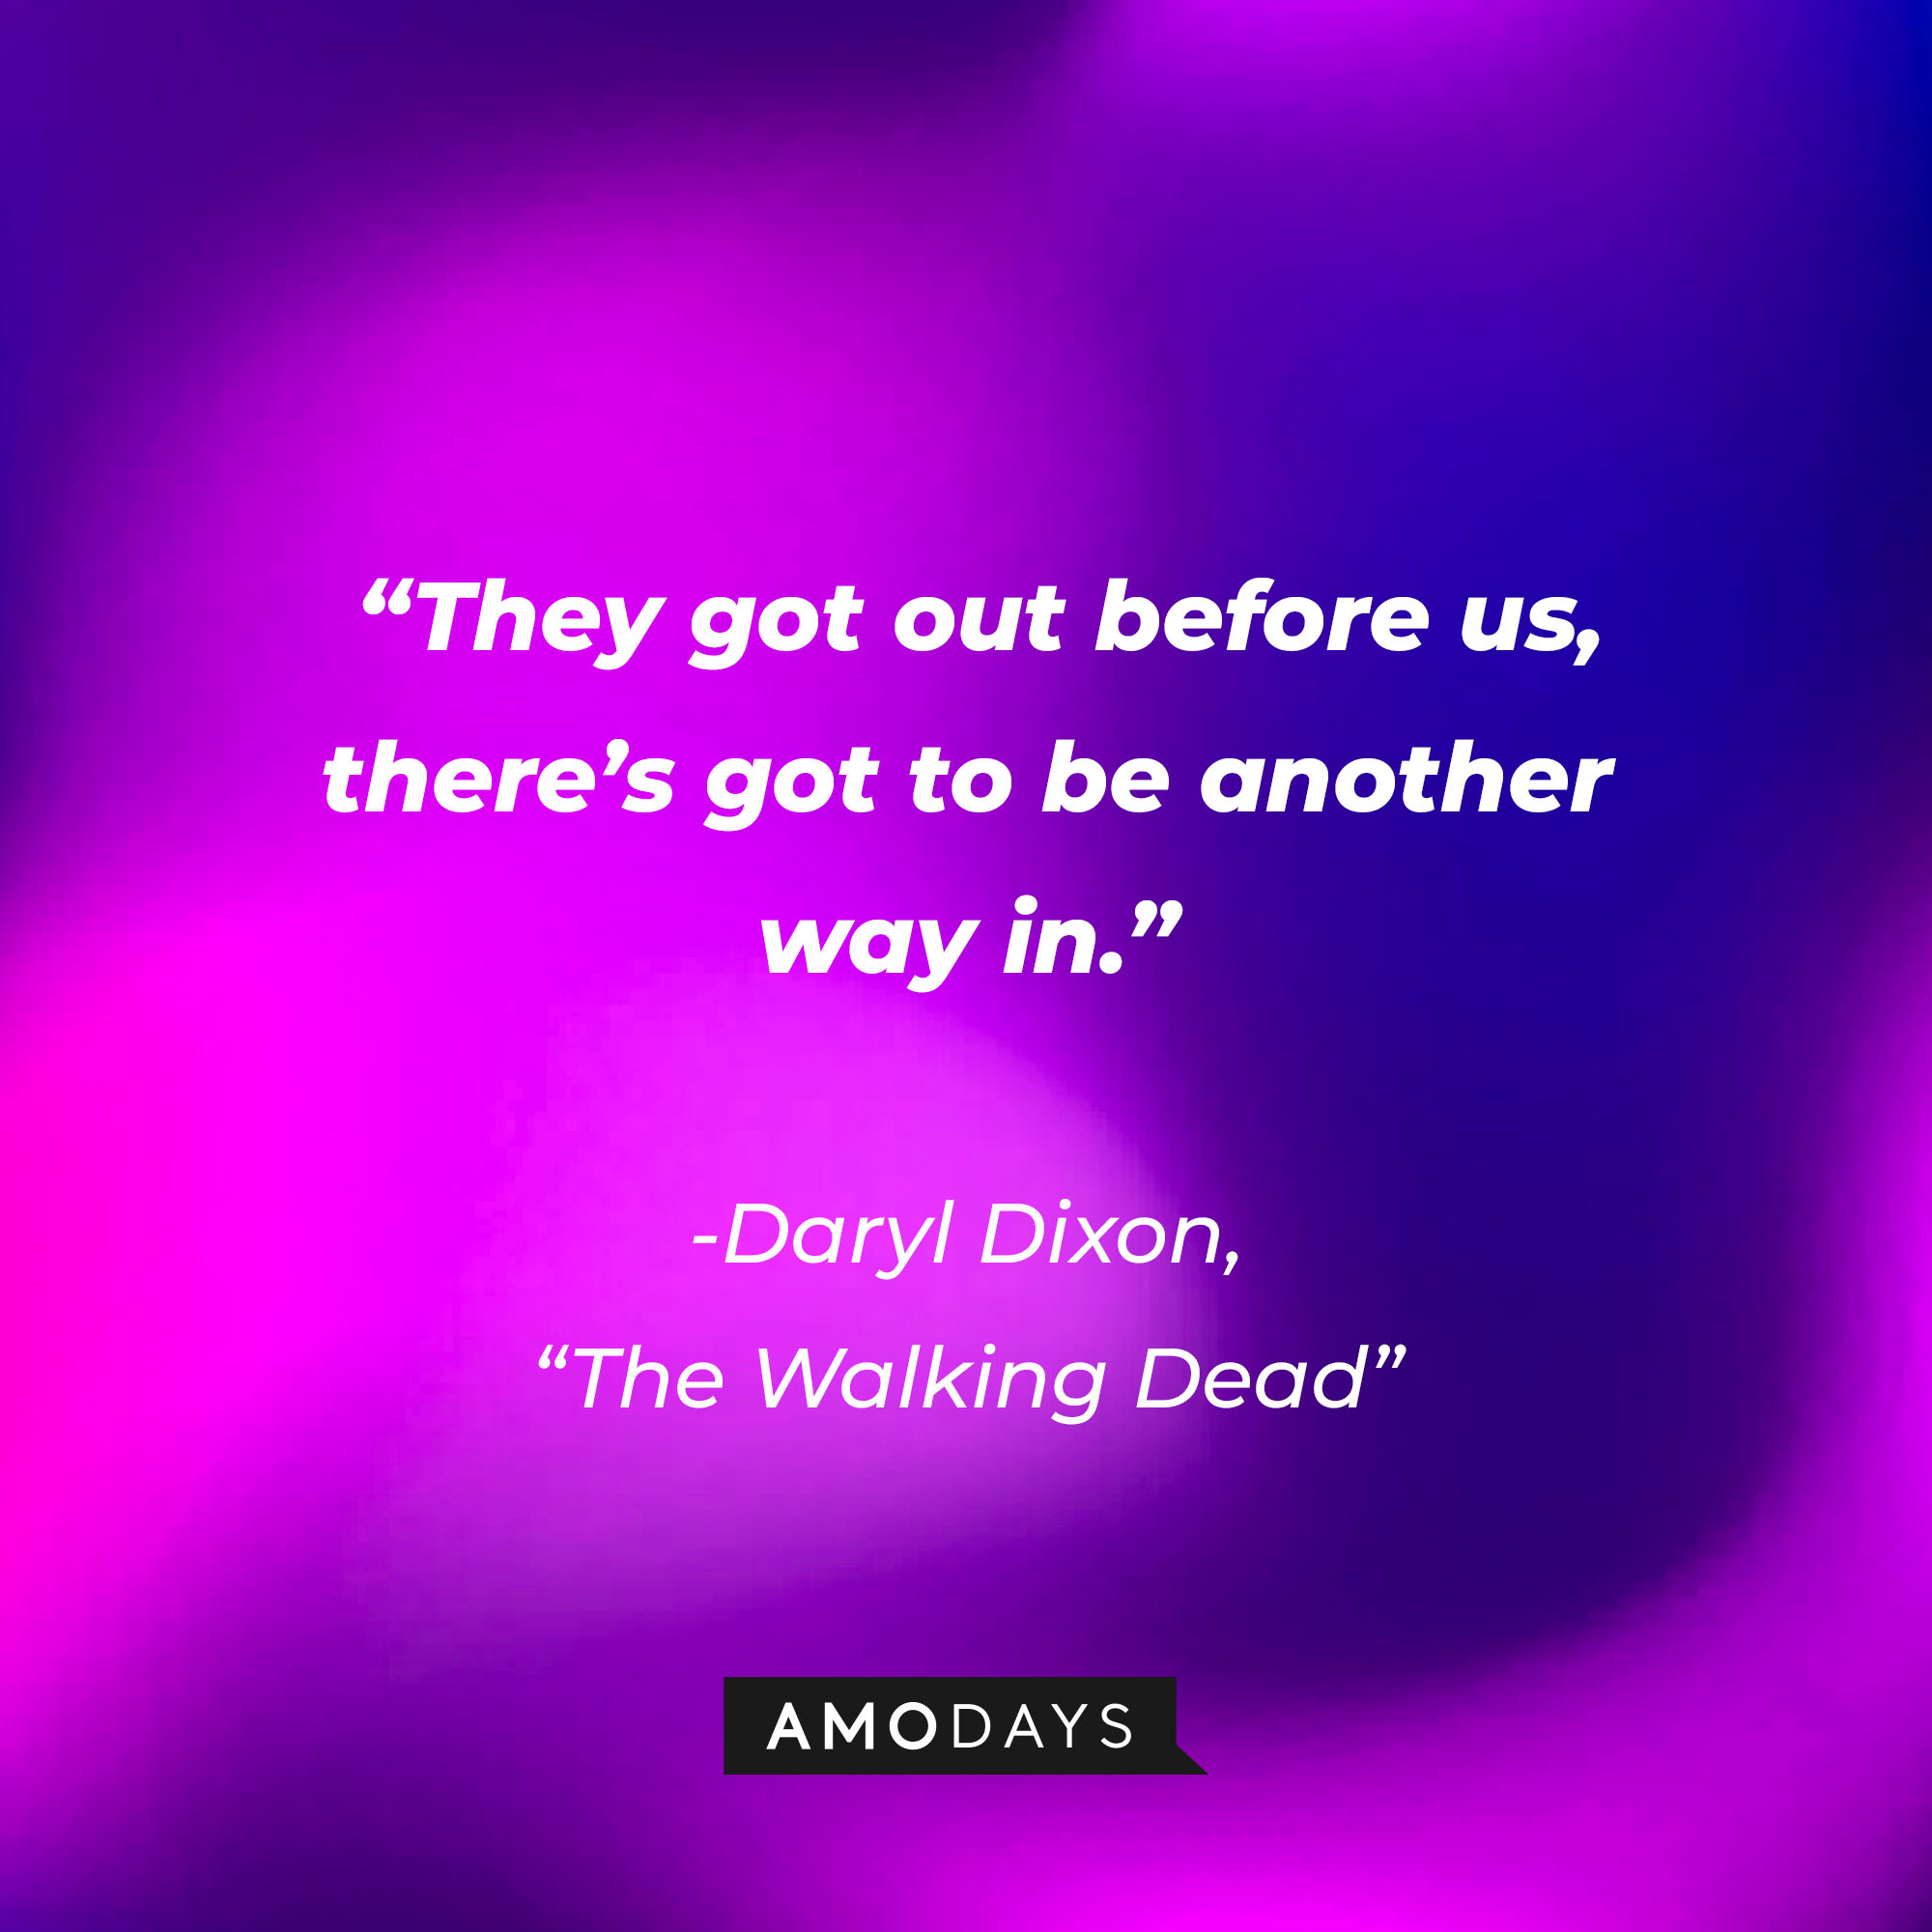 Daryl Dixon’s quote from “The Walking Dead”: “They got out before us, there’s got to be another way in.” | Source: AmoDays